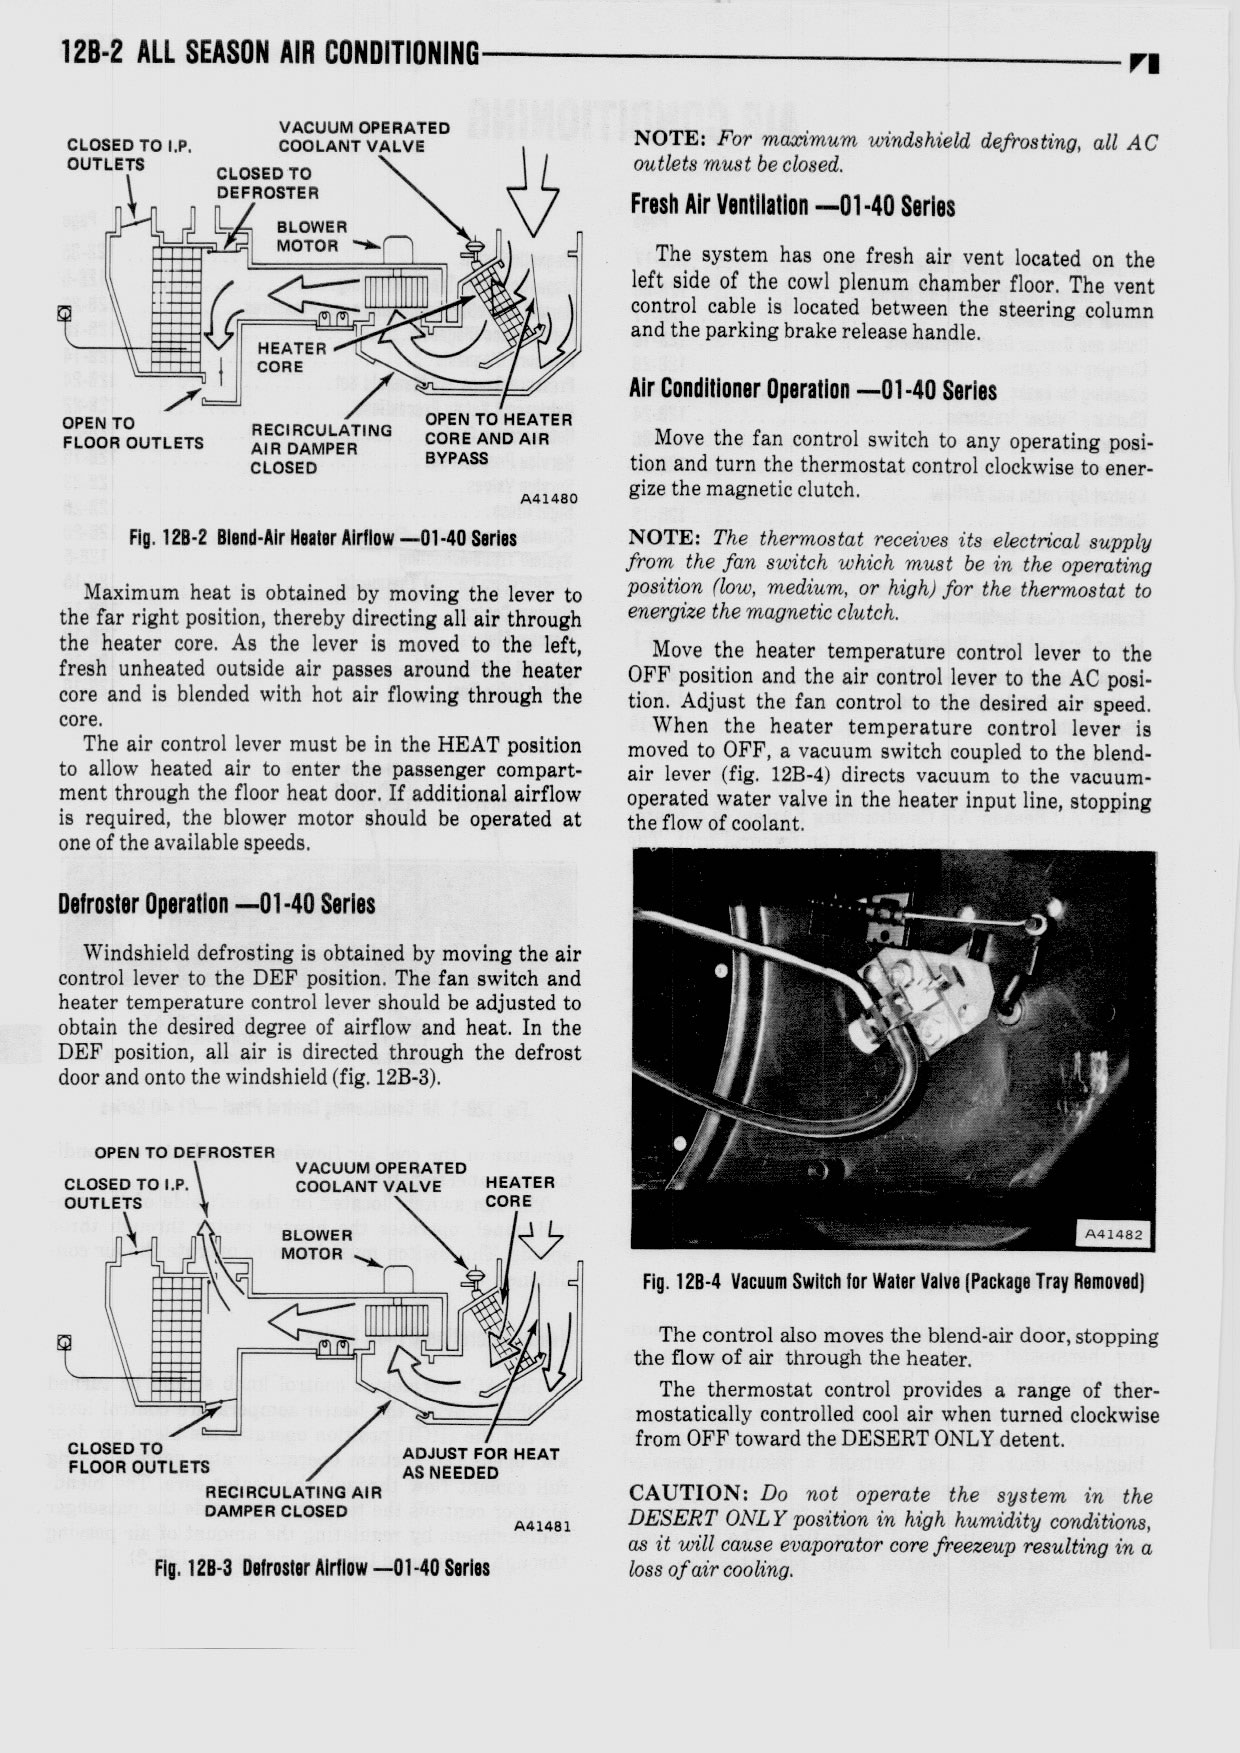 12B Air Conditioning / 1976 AMC Technical Service Manual_Page_666.jpg